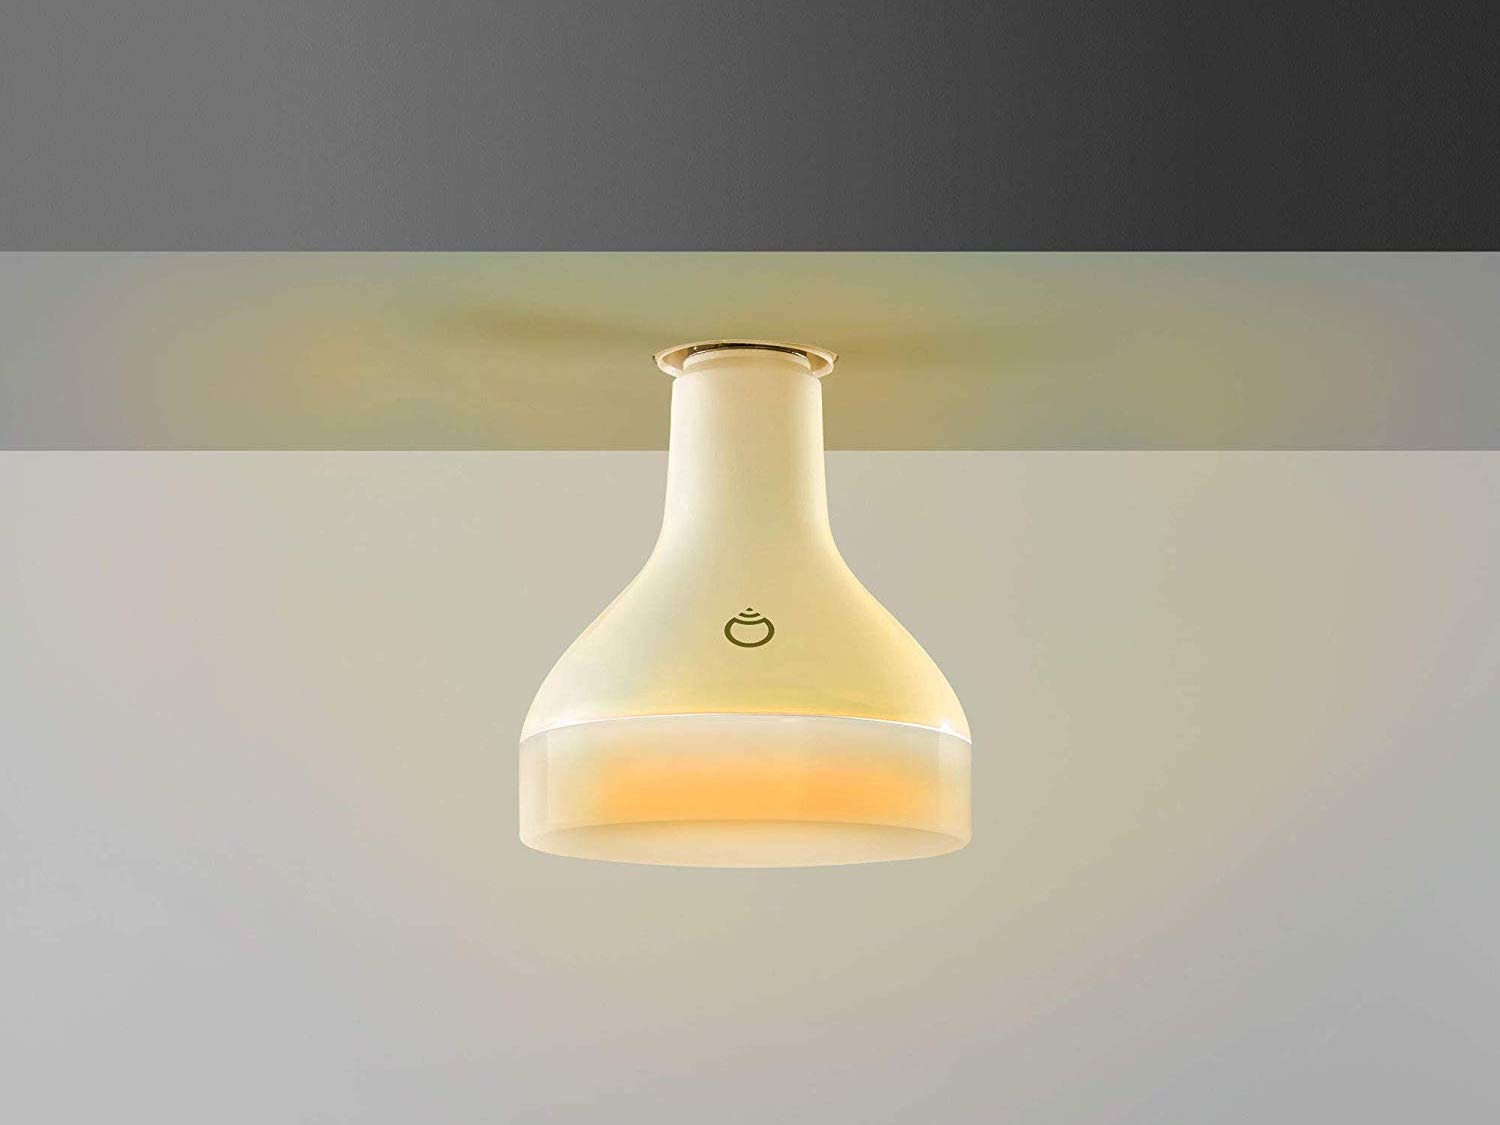 Details about   LIFX LED Light Bulb Colour White A19 A60 BR30 Nightvision Antibacterial Filament 